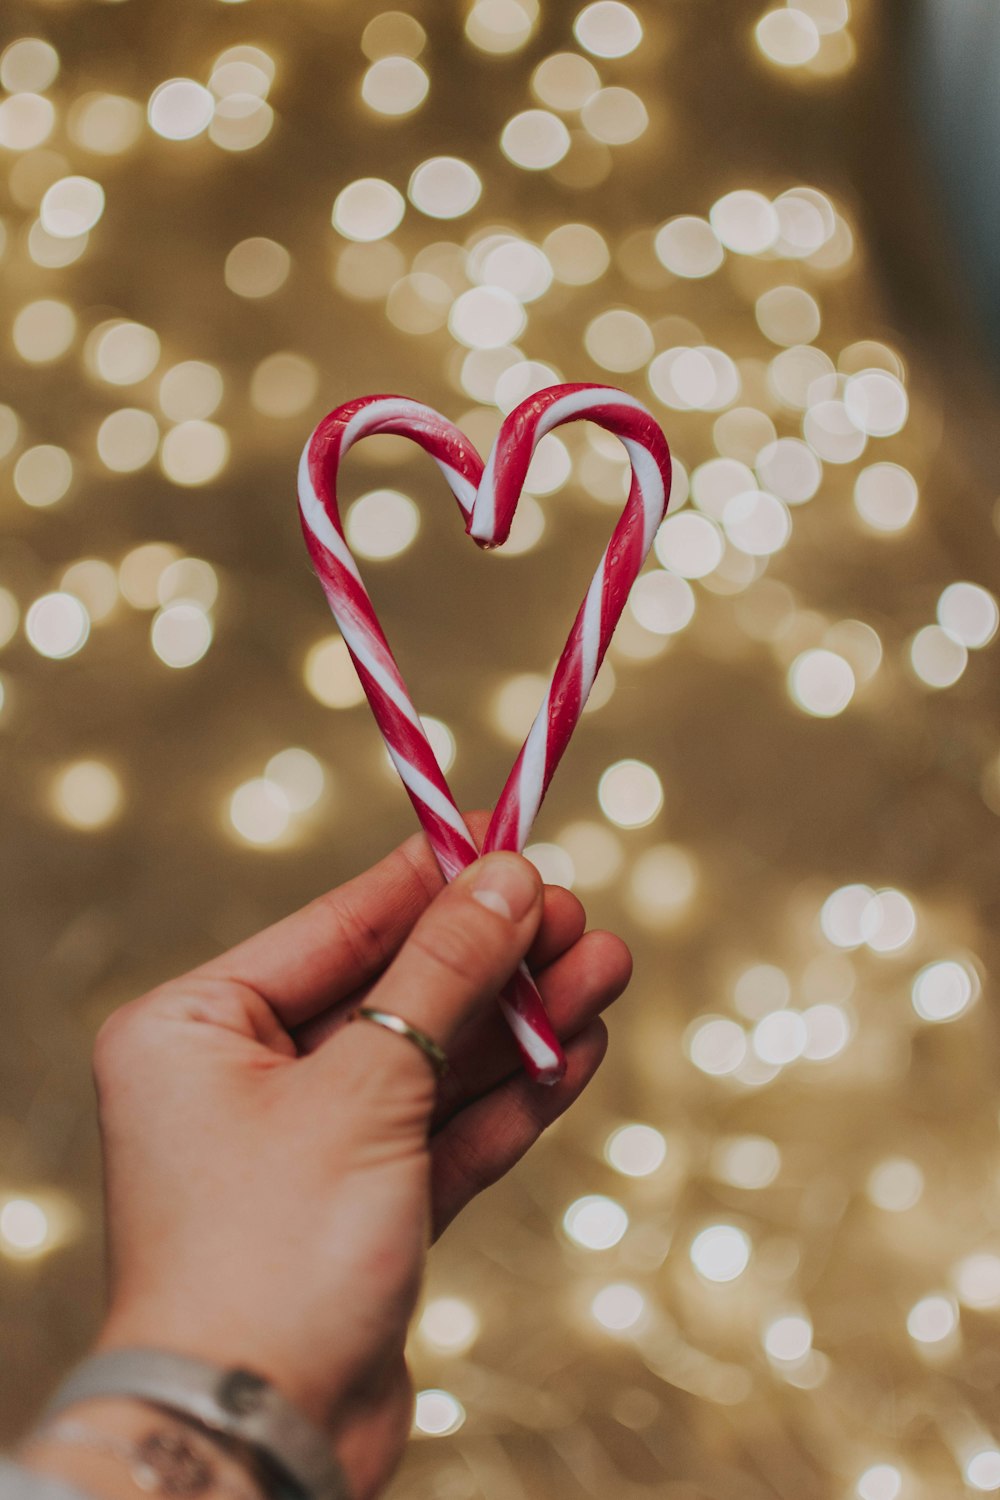 person holding candy cane shaped to a heart